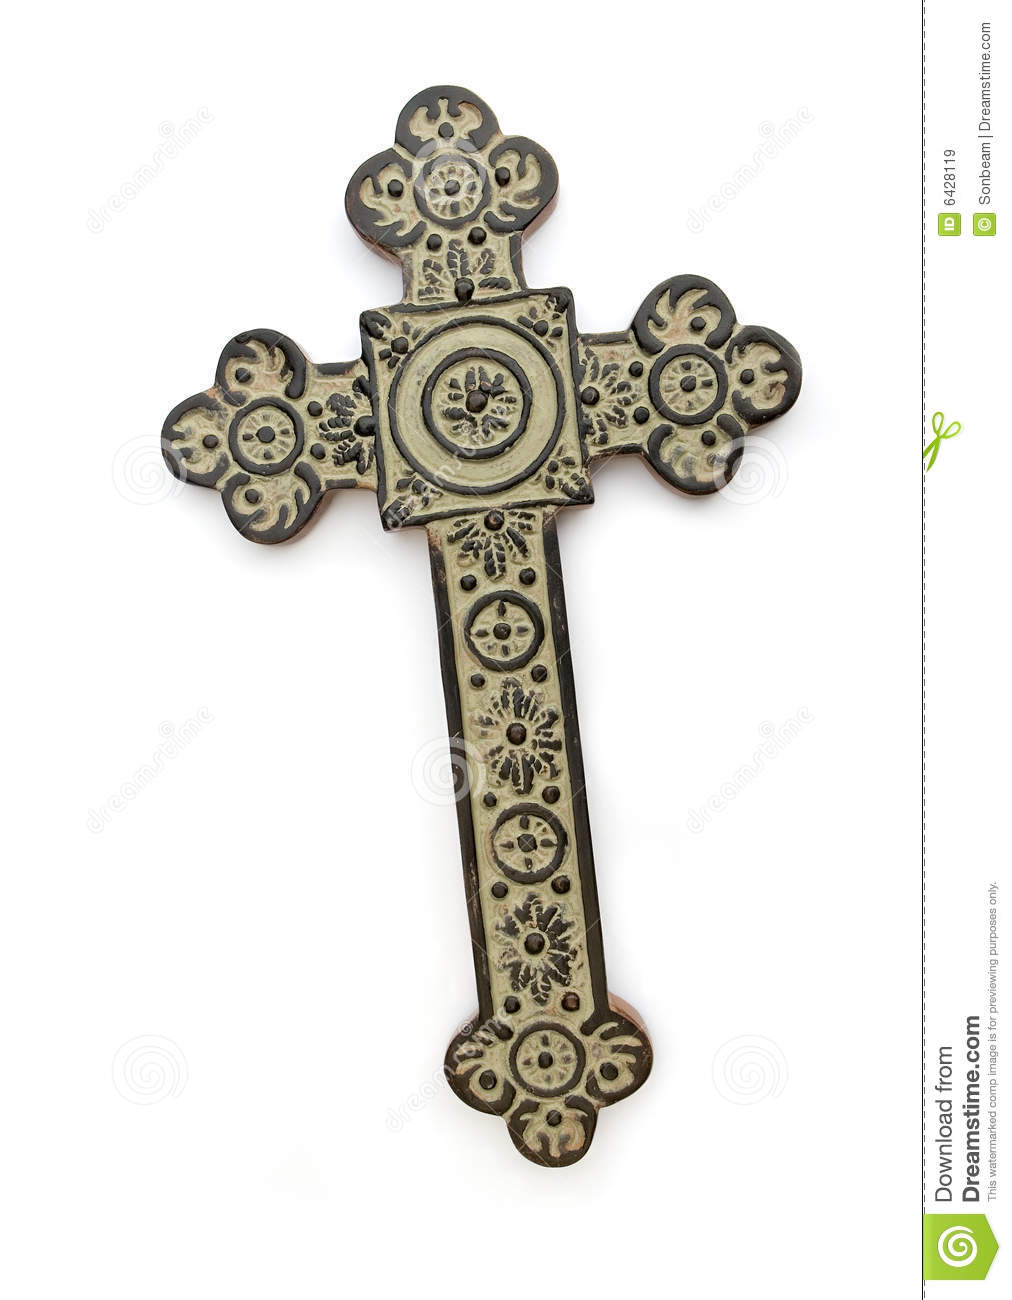 Gothic Cross Royalty Free Stock Images   Image  6428119